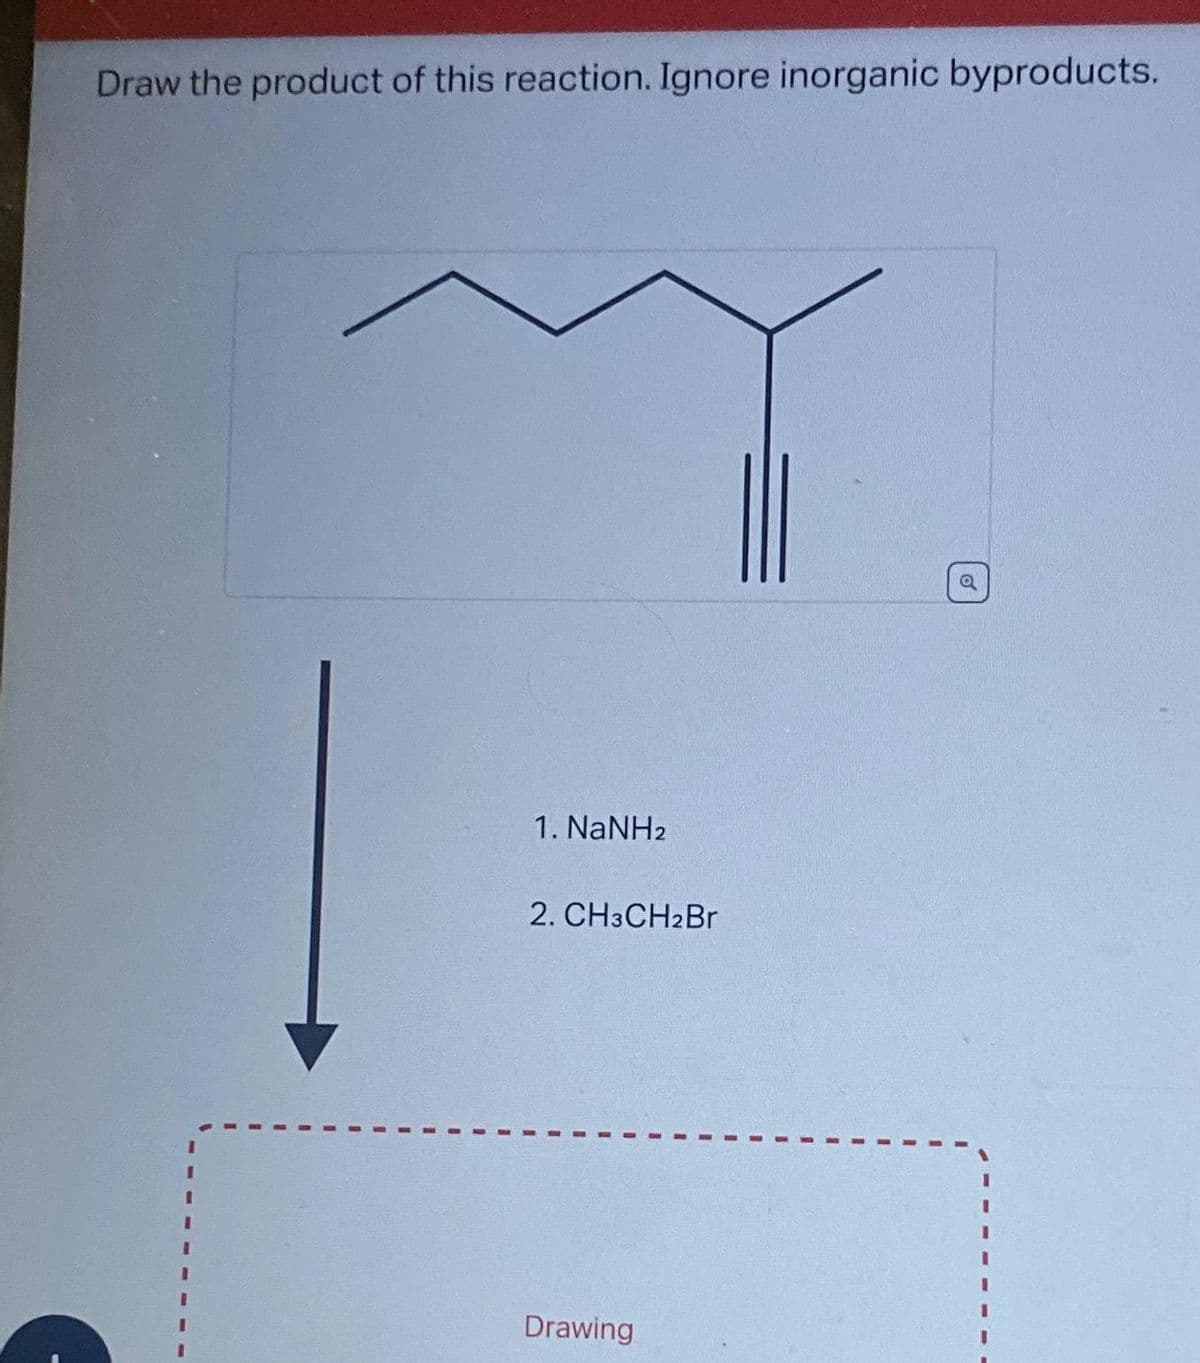 Draw the product of this reaction. Ignore inorganic byproducts.
1. NaNH2
2. CH3CH2Br
Drawing